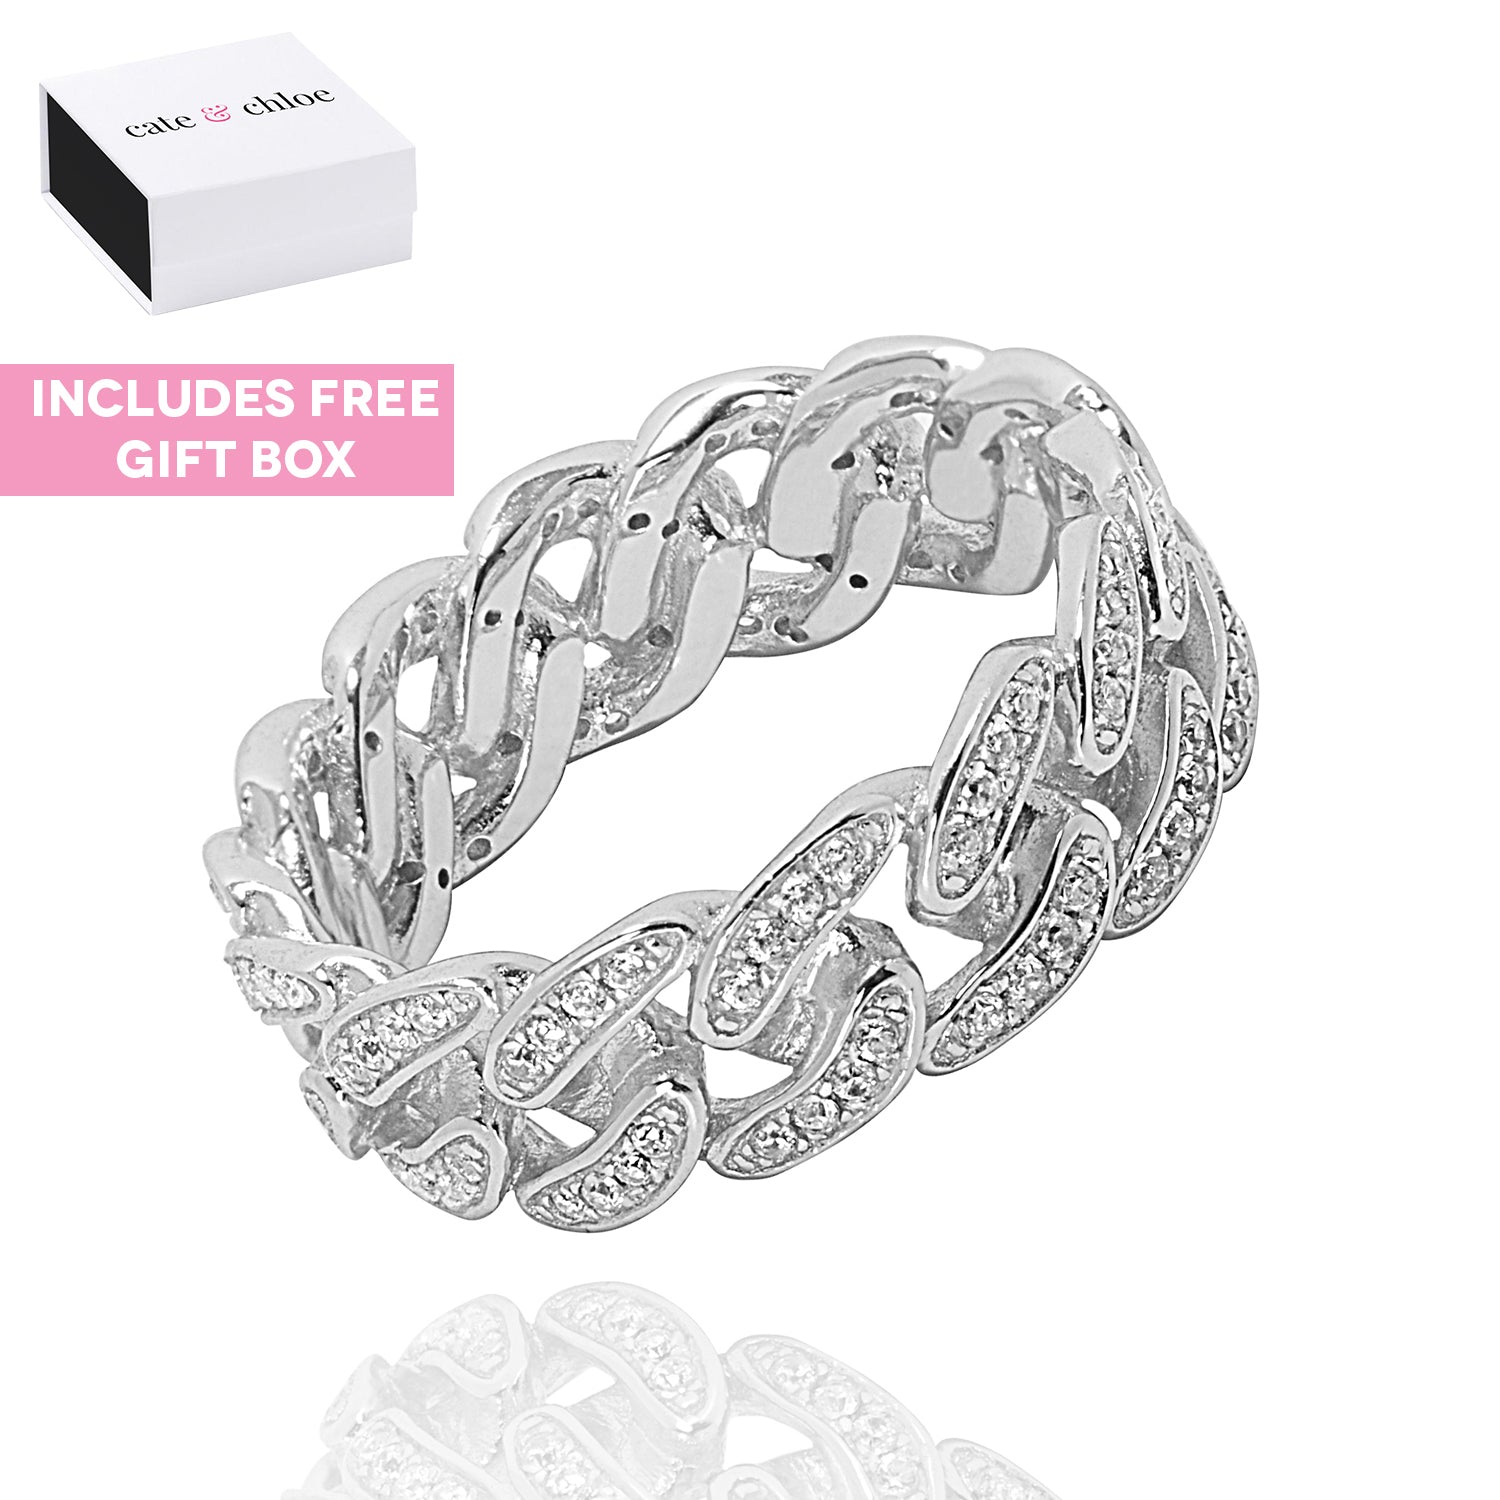 Scarlett 18k White Gold Plated Infinity Chain Link Ring - Silver